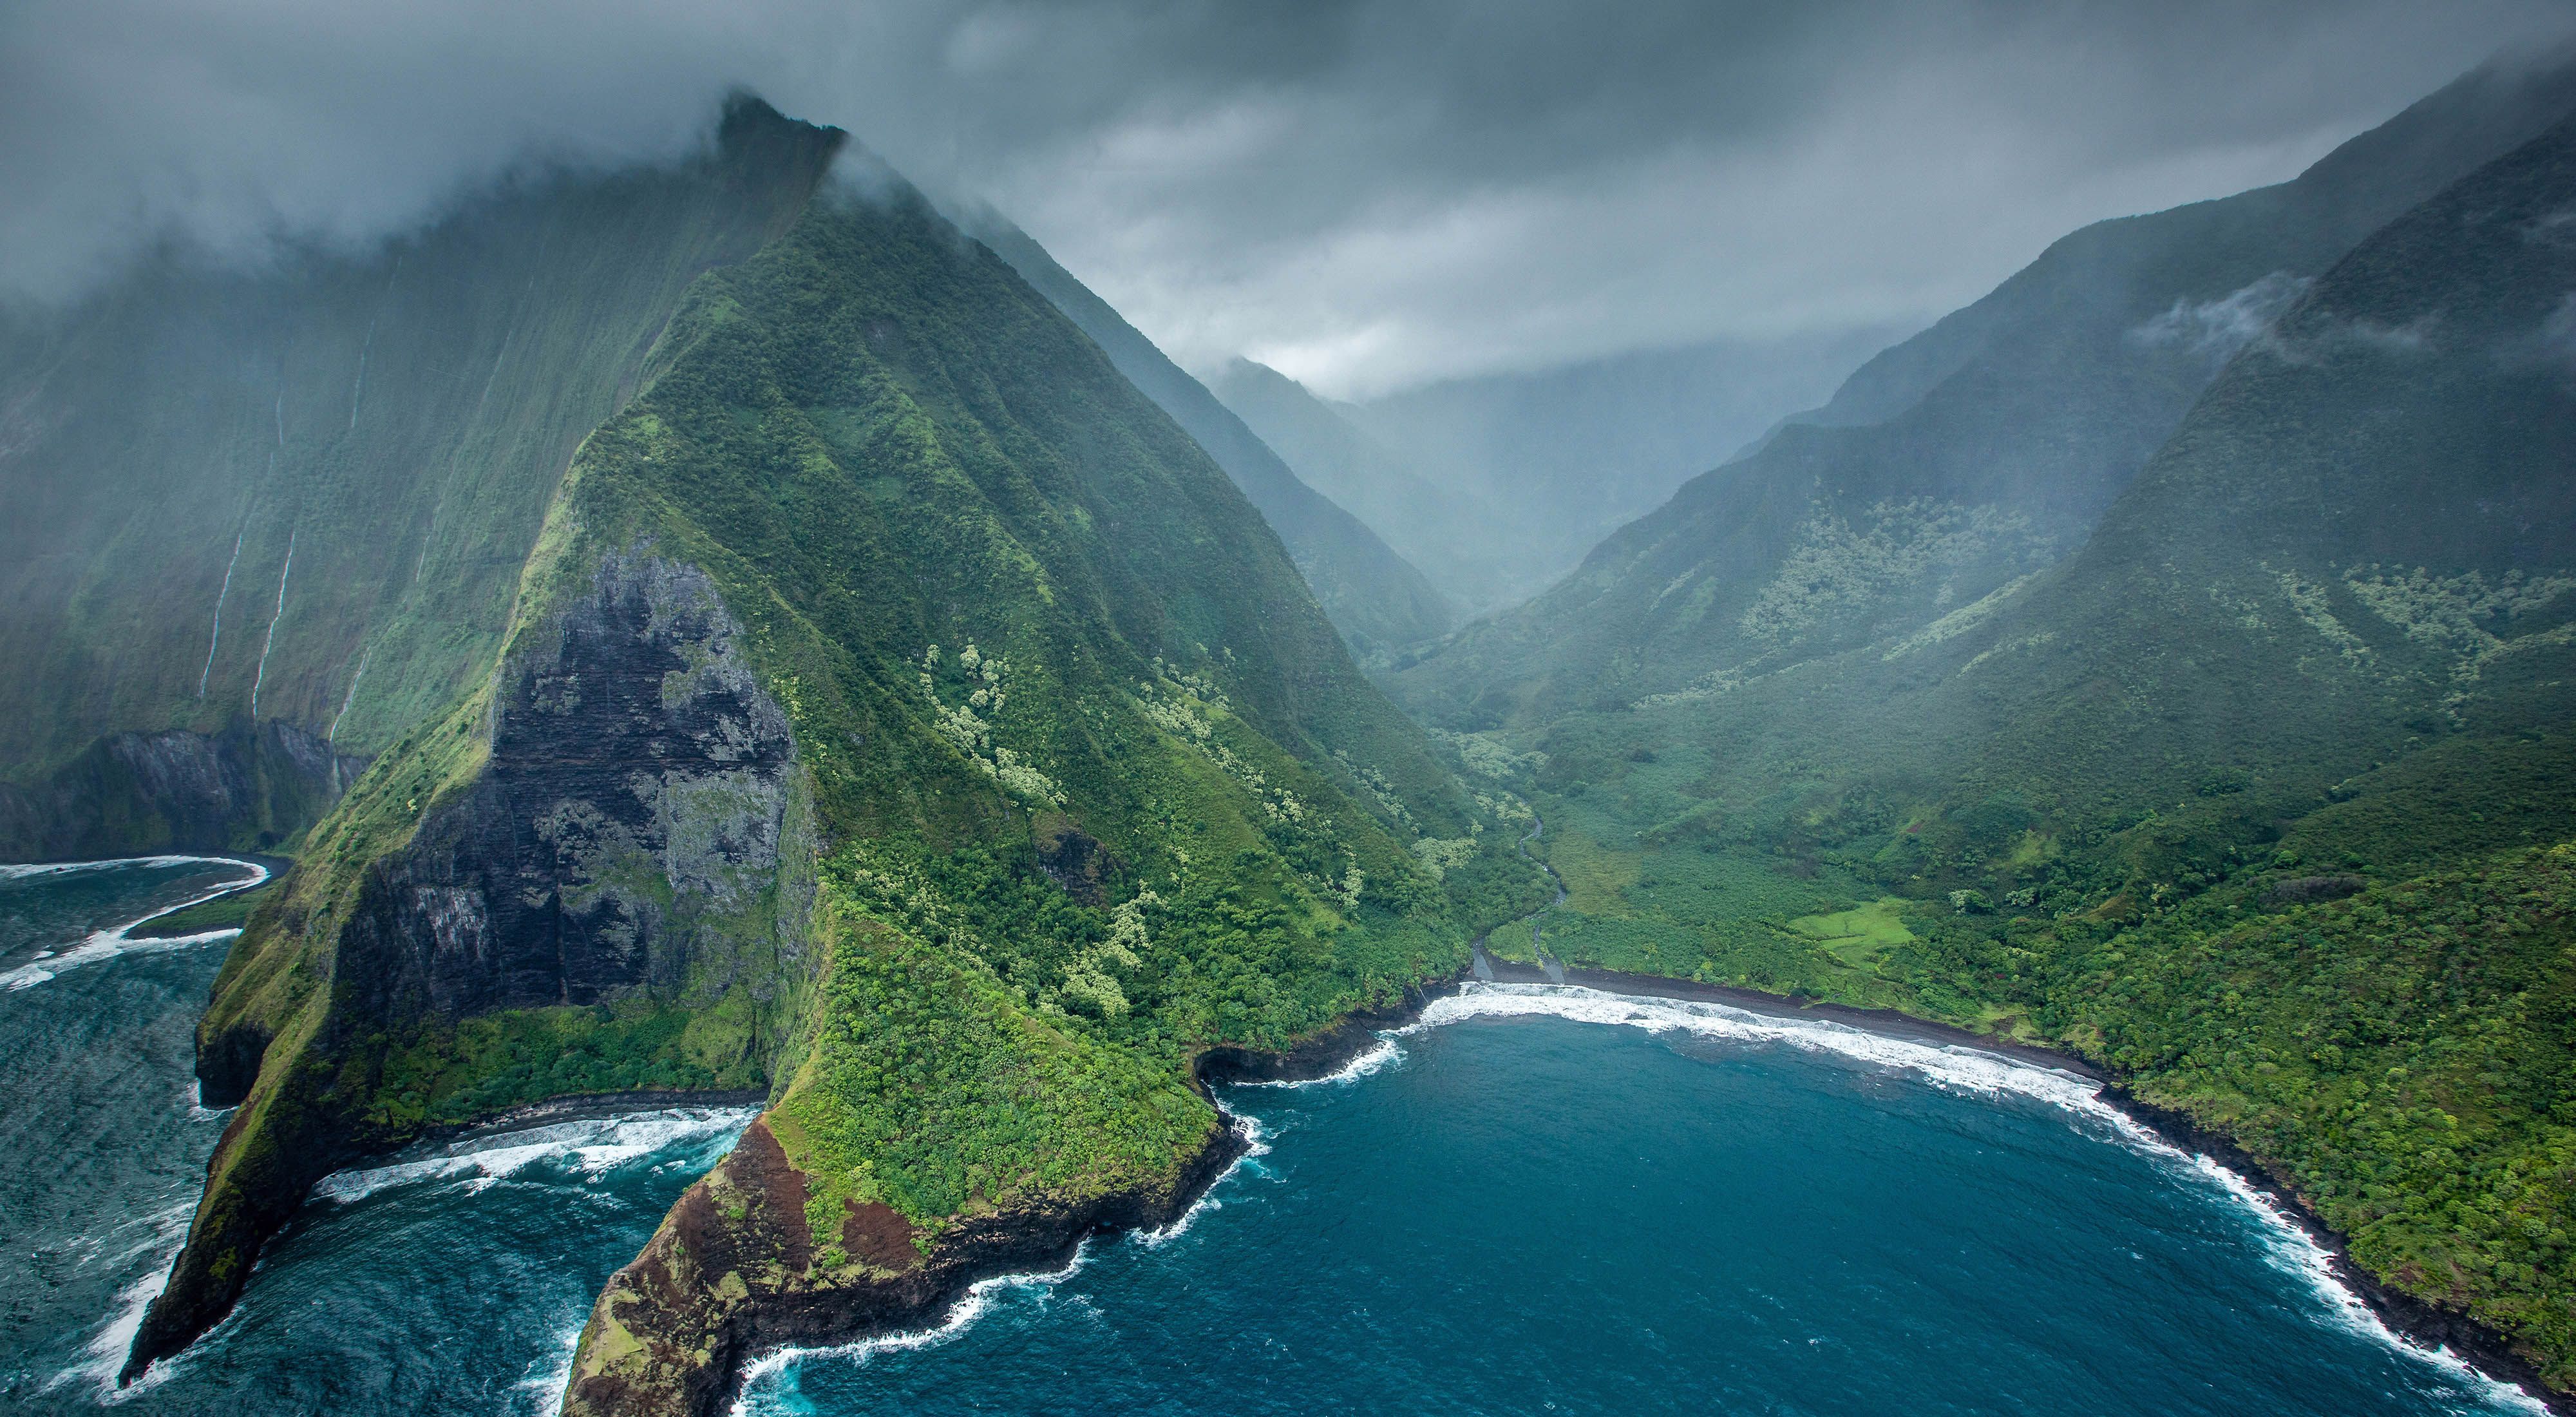 Steep, rugged mountains rise abruptly from the sea, surrounding a secluded lush green valley.